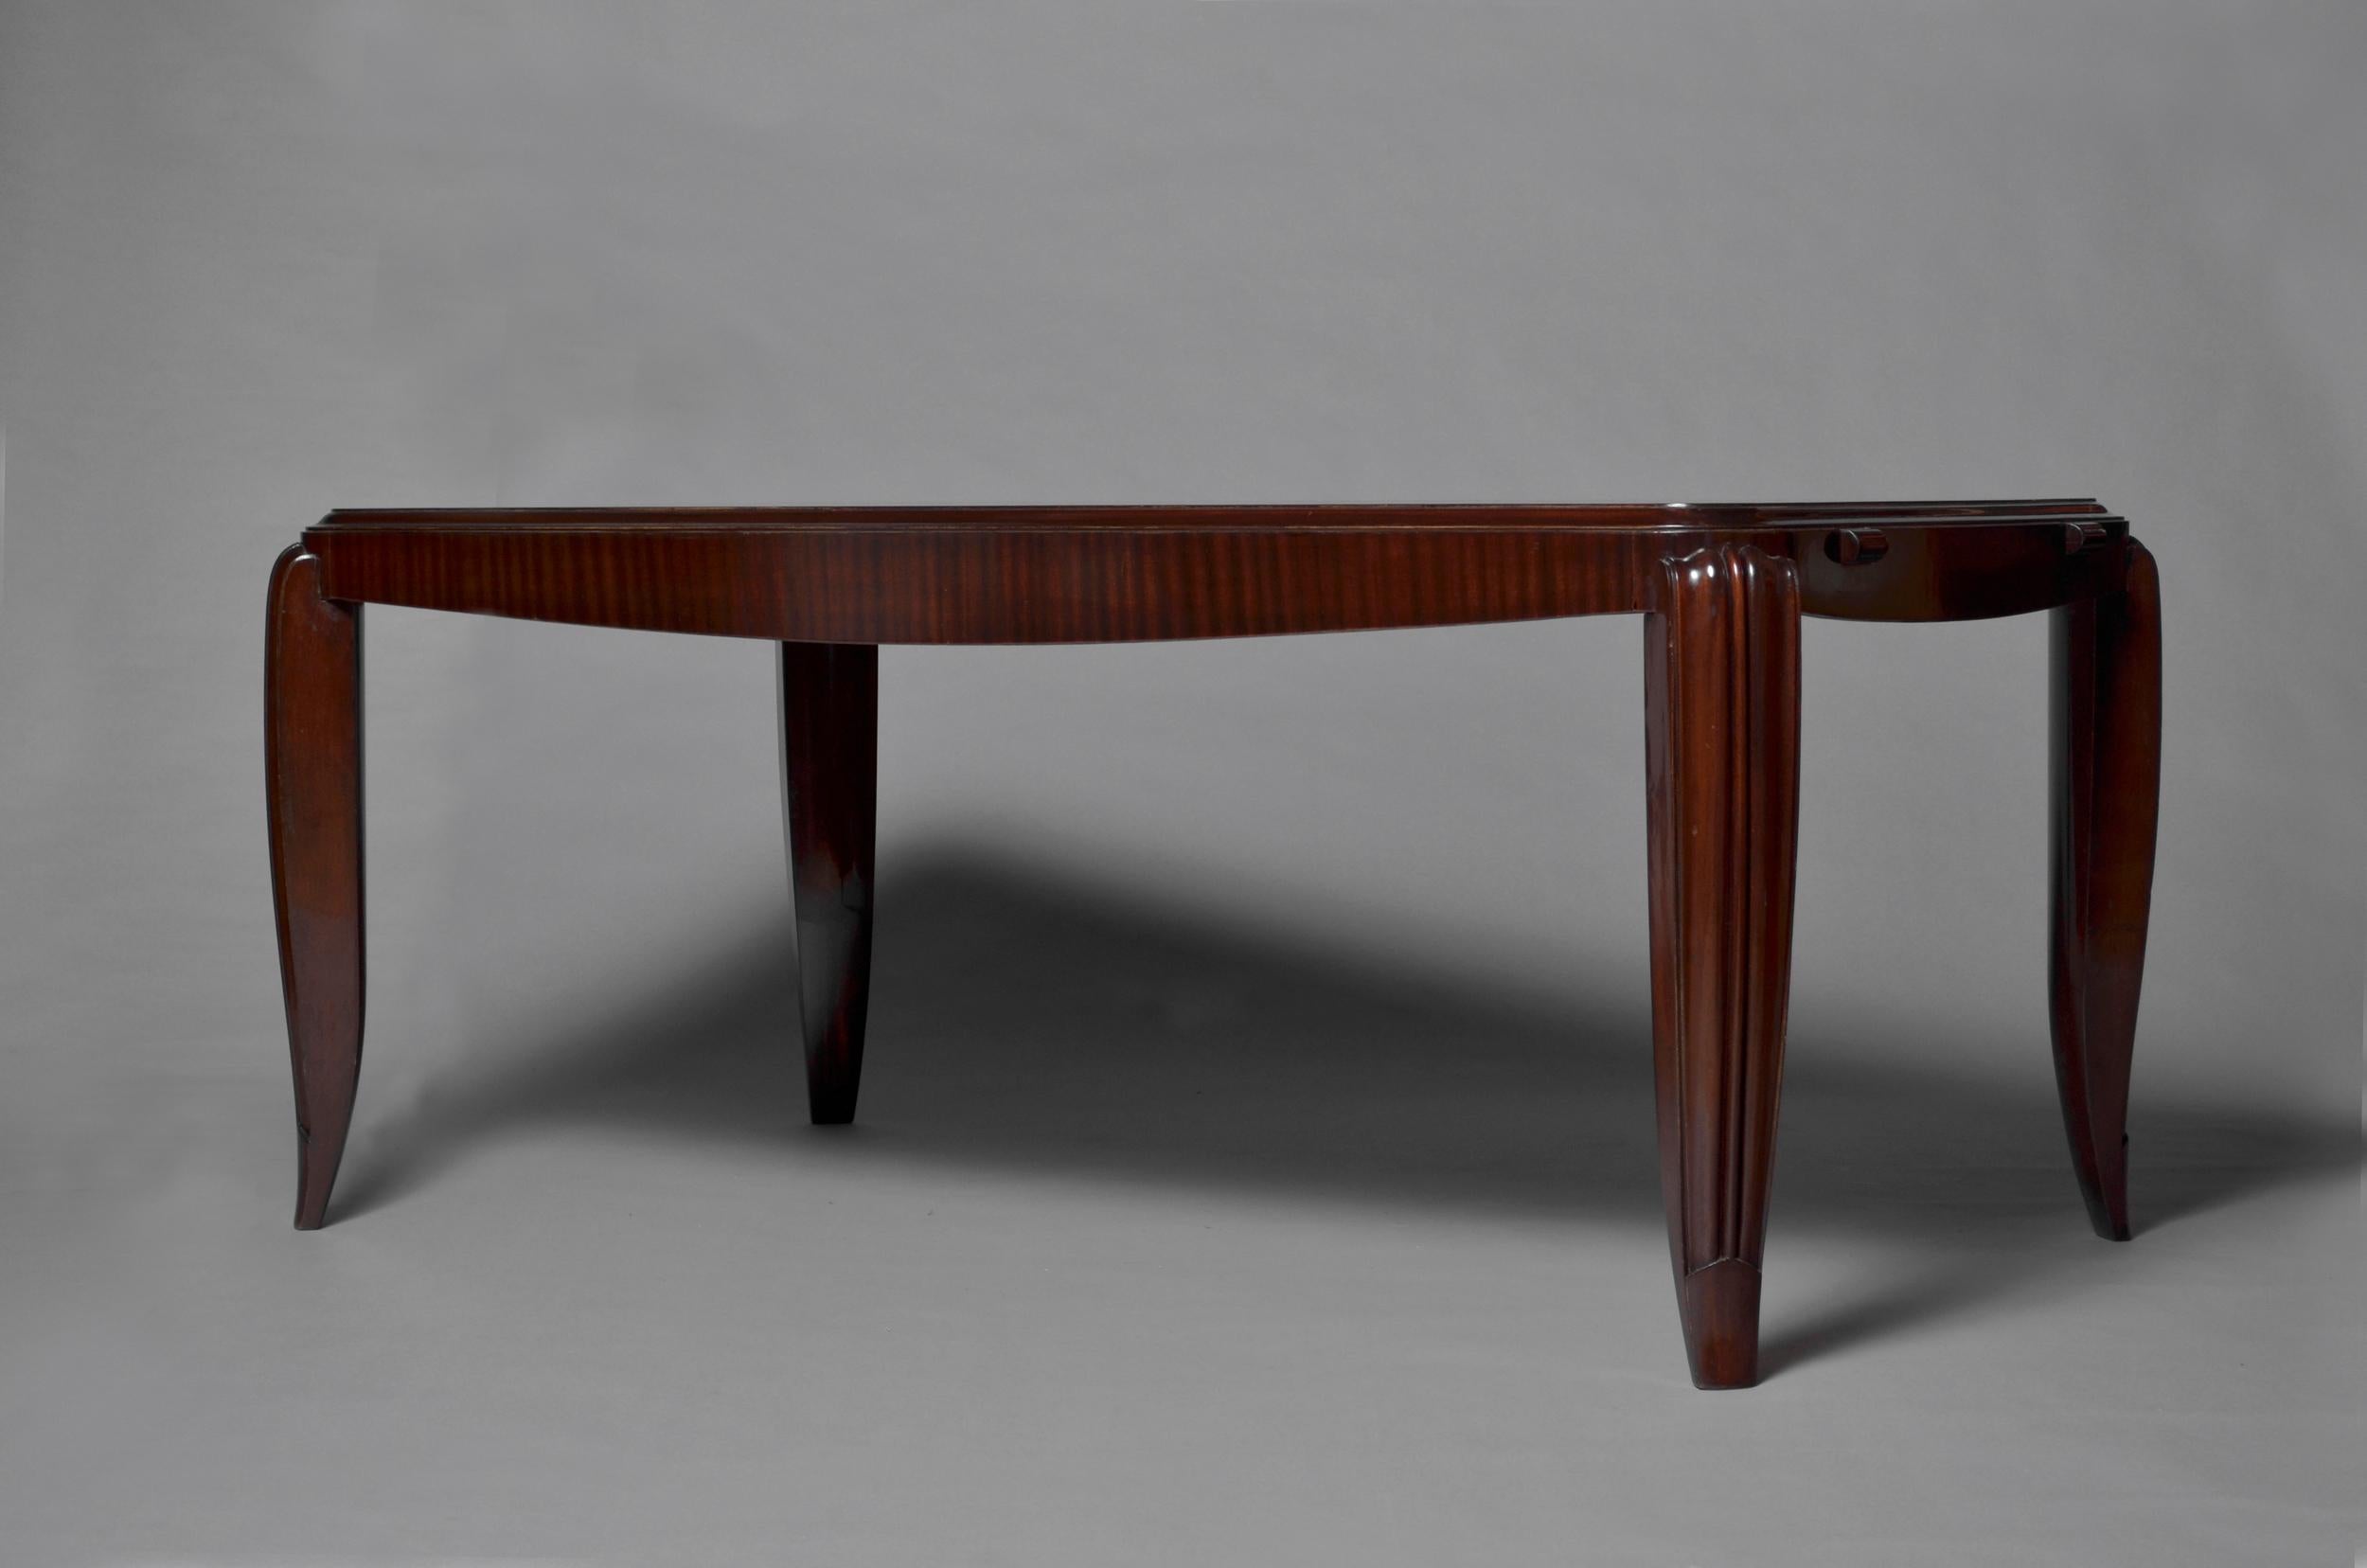 A Fine French Art Deco Mahogany Dining Table in the manner of Jean Pascaud For Sale 2